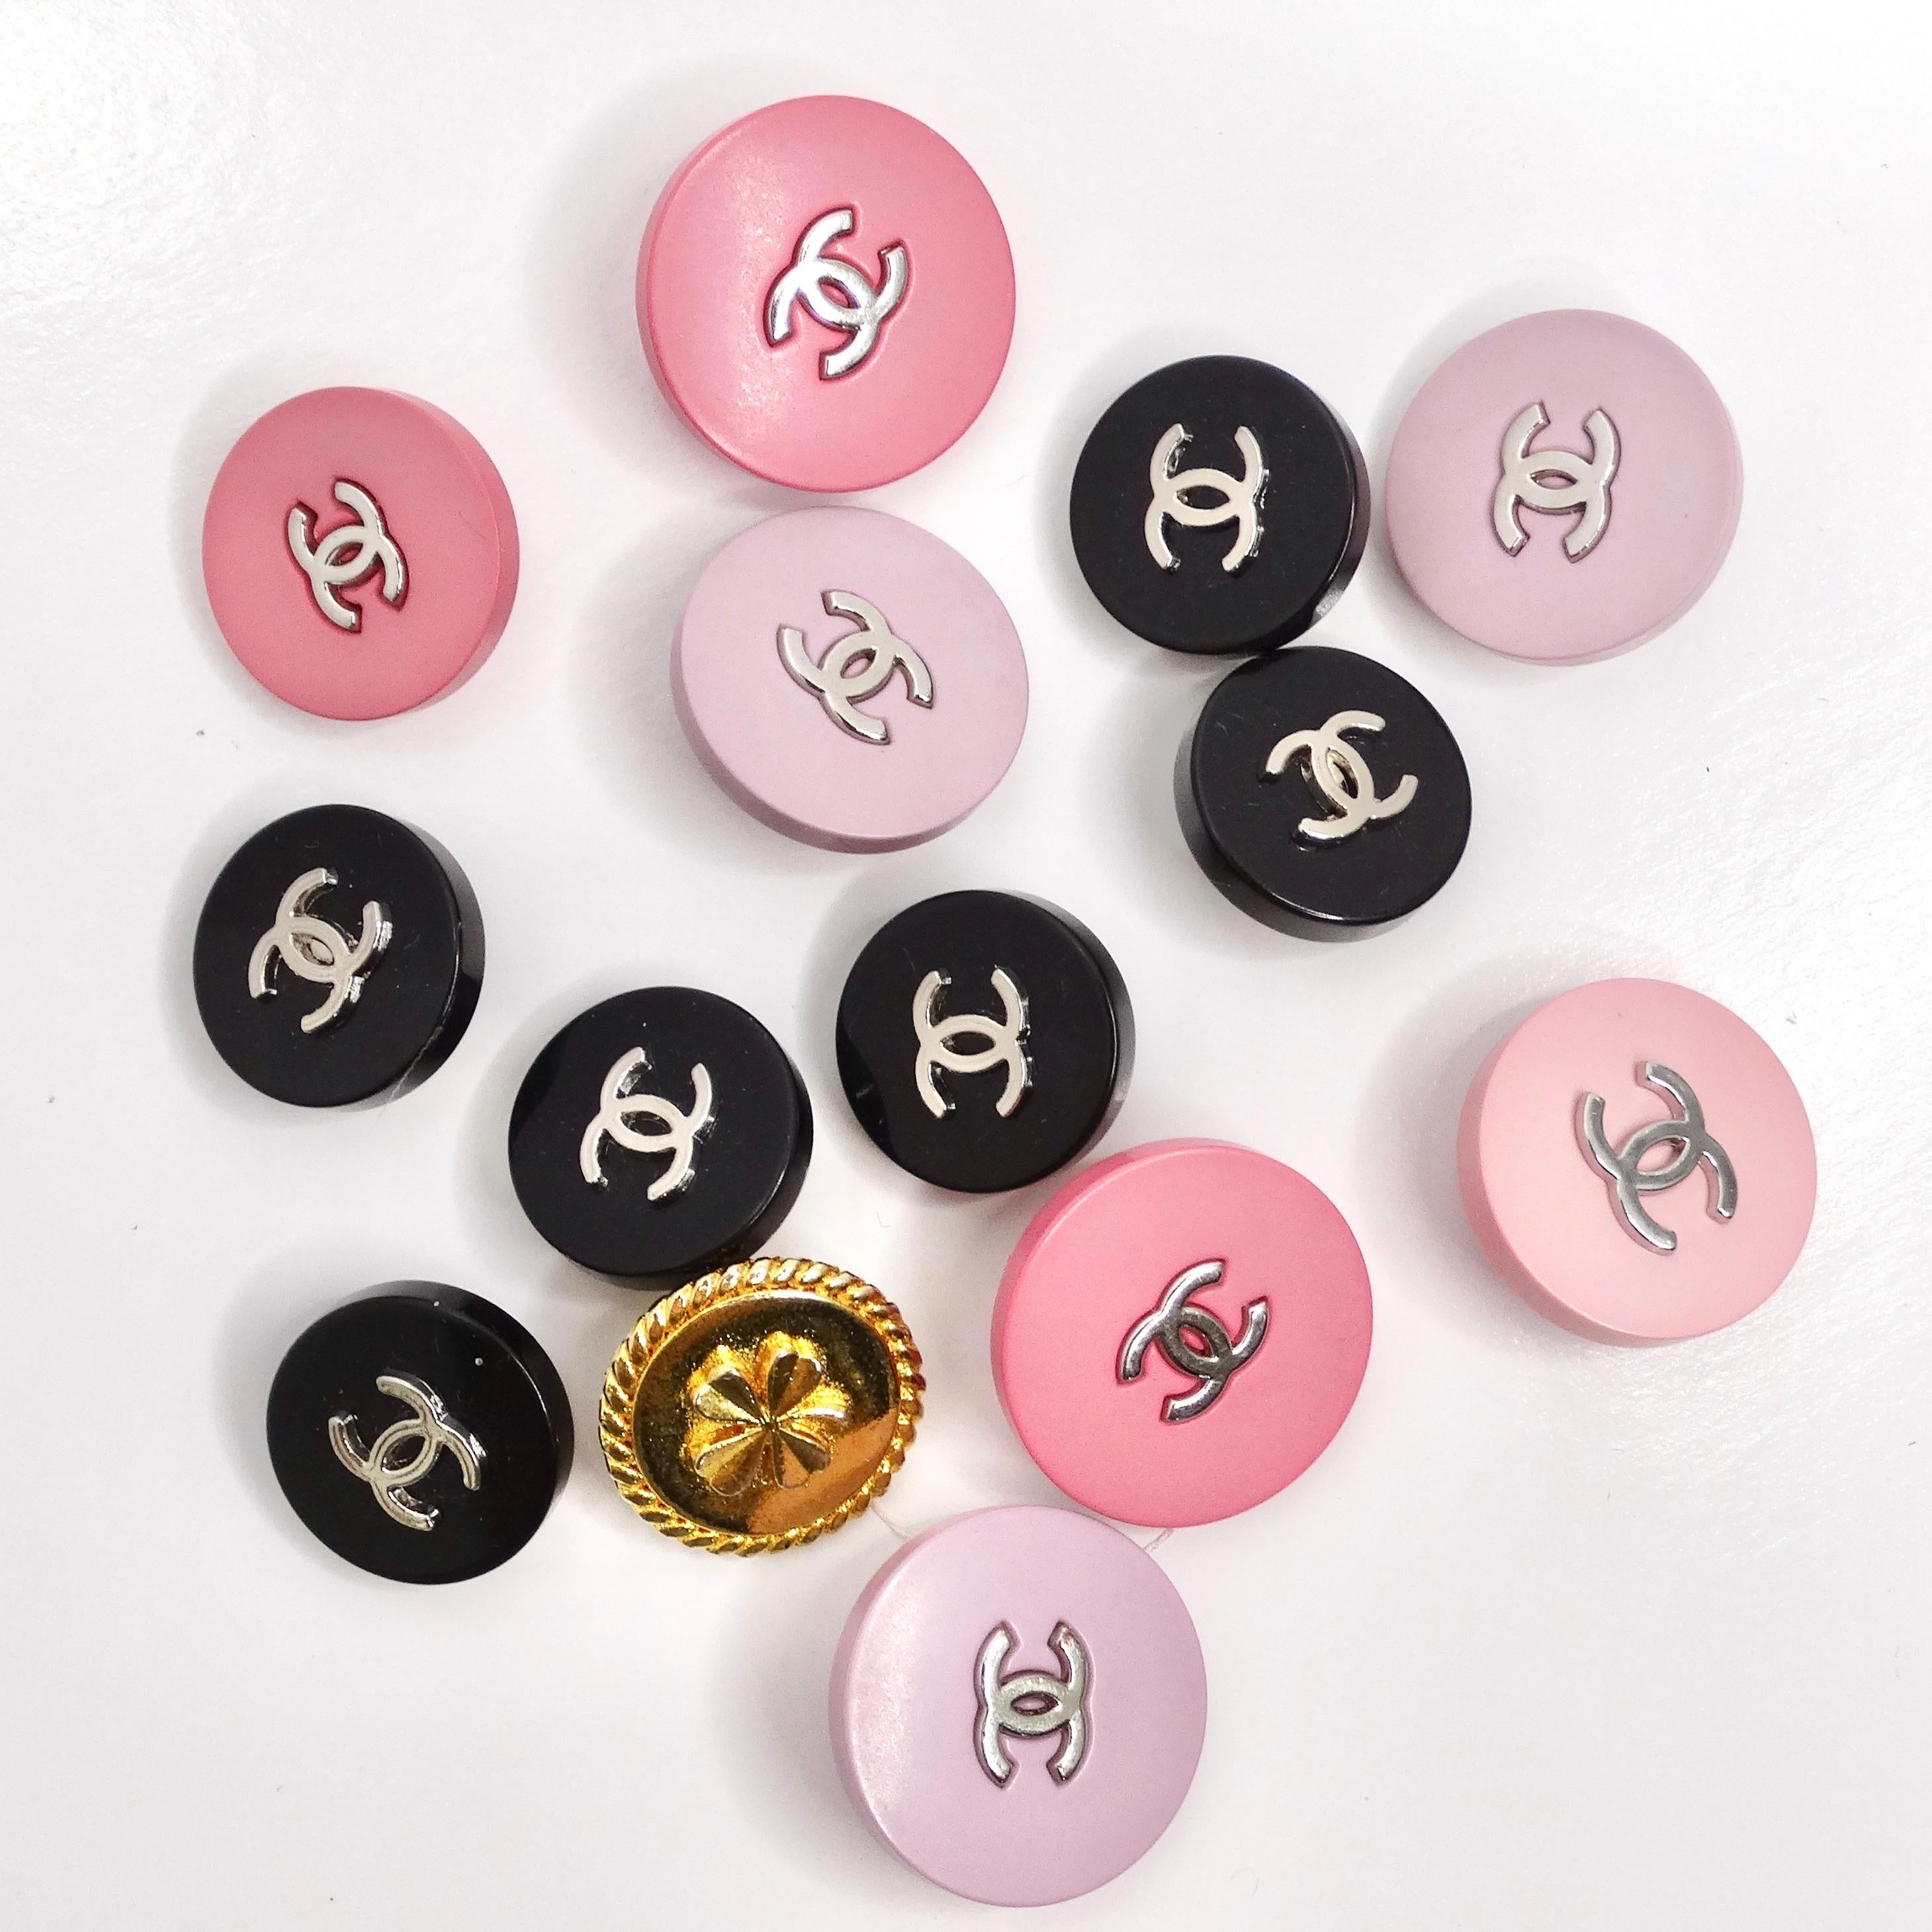 Chanel 1980s and 90s Set Of 21 Buttons 5